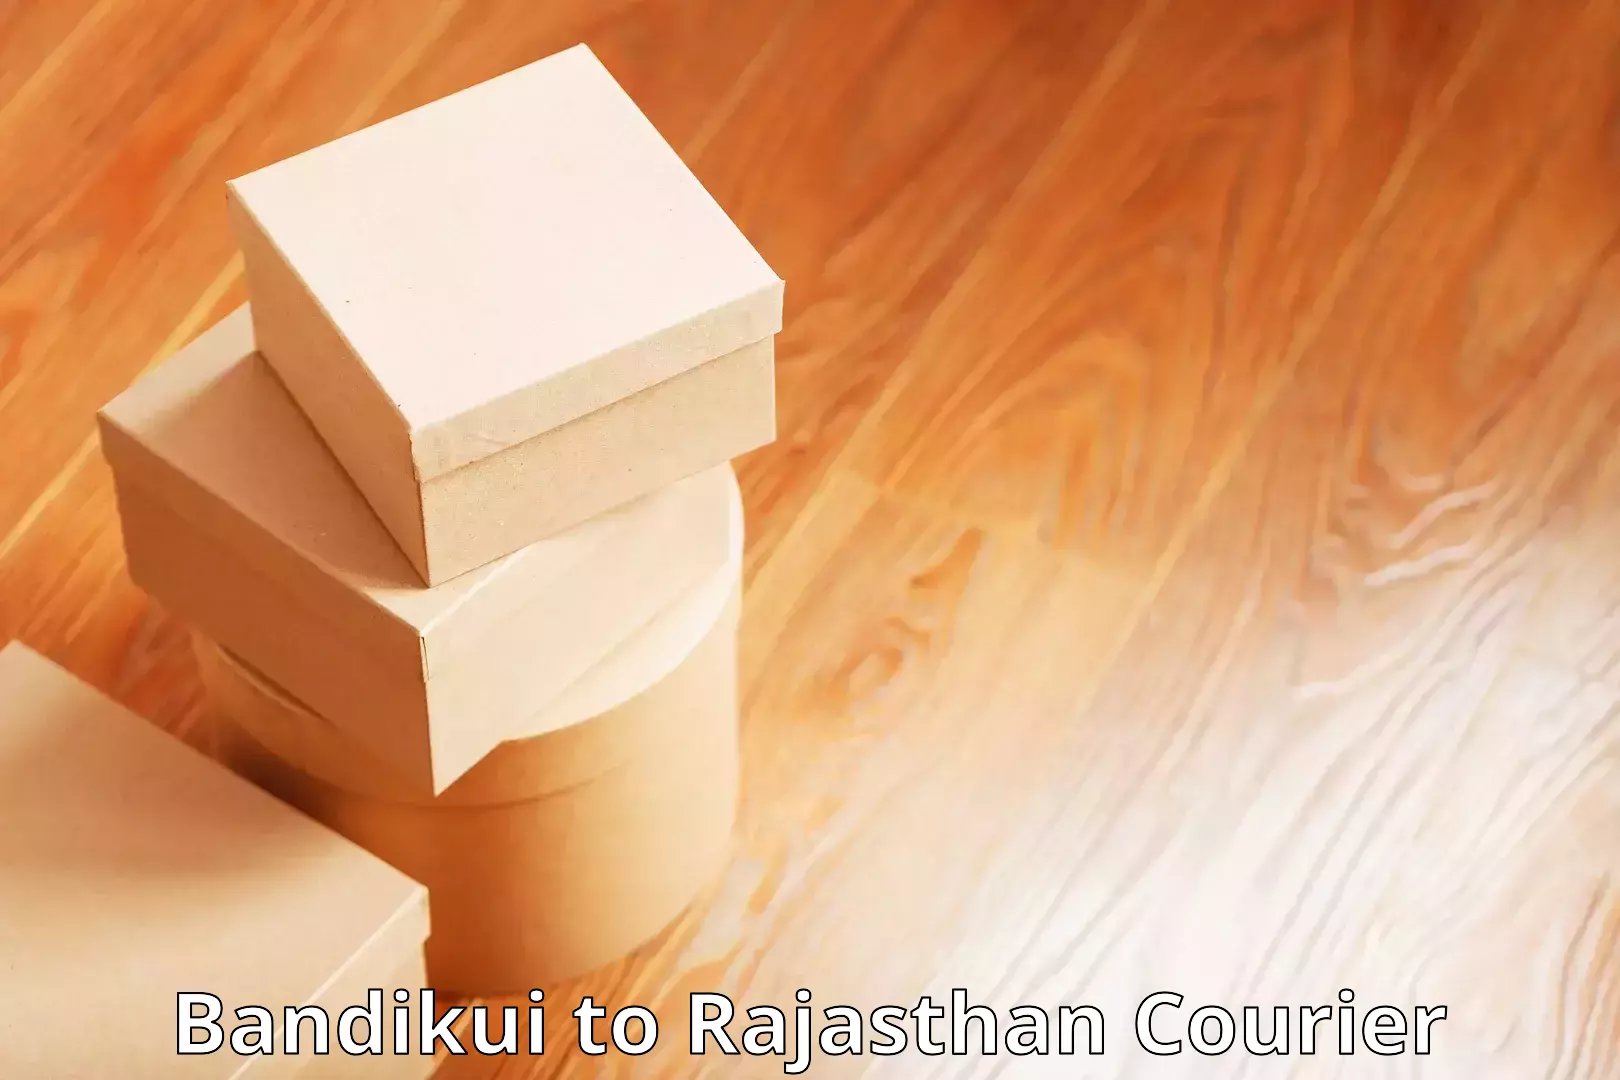 24-hour courier service in Bandikui to Rajasthan